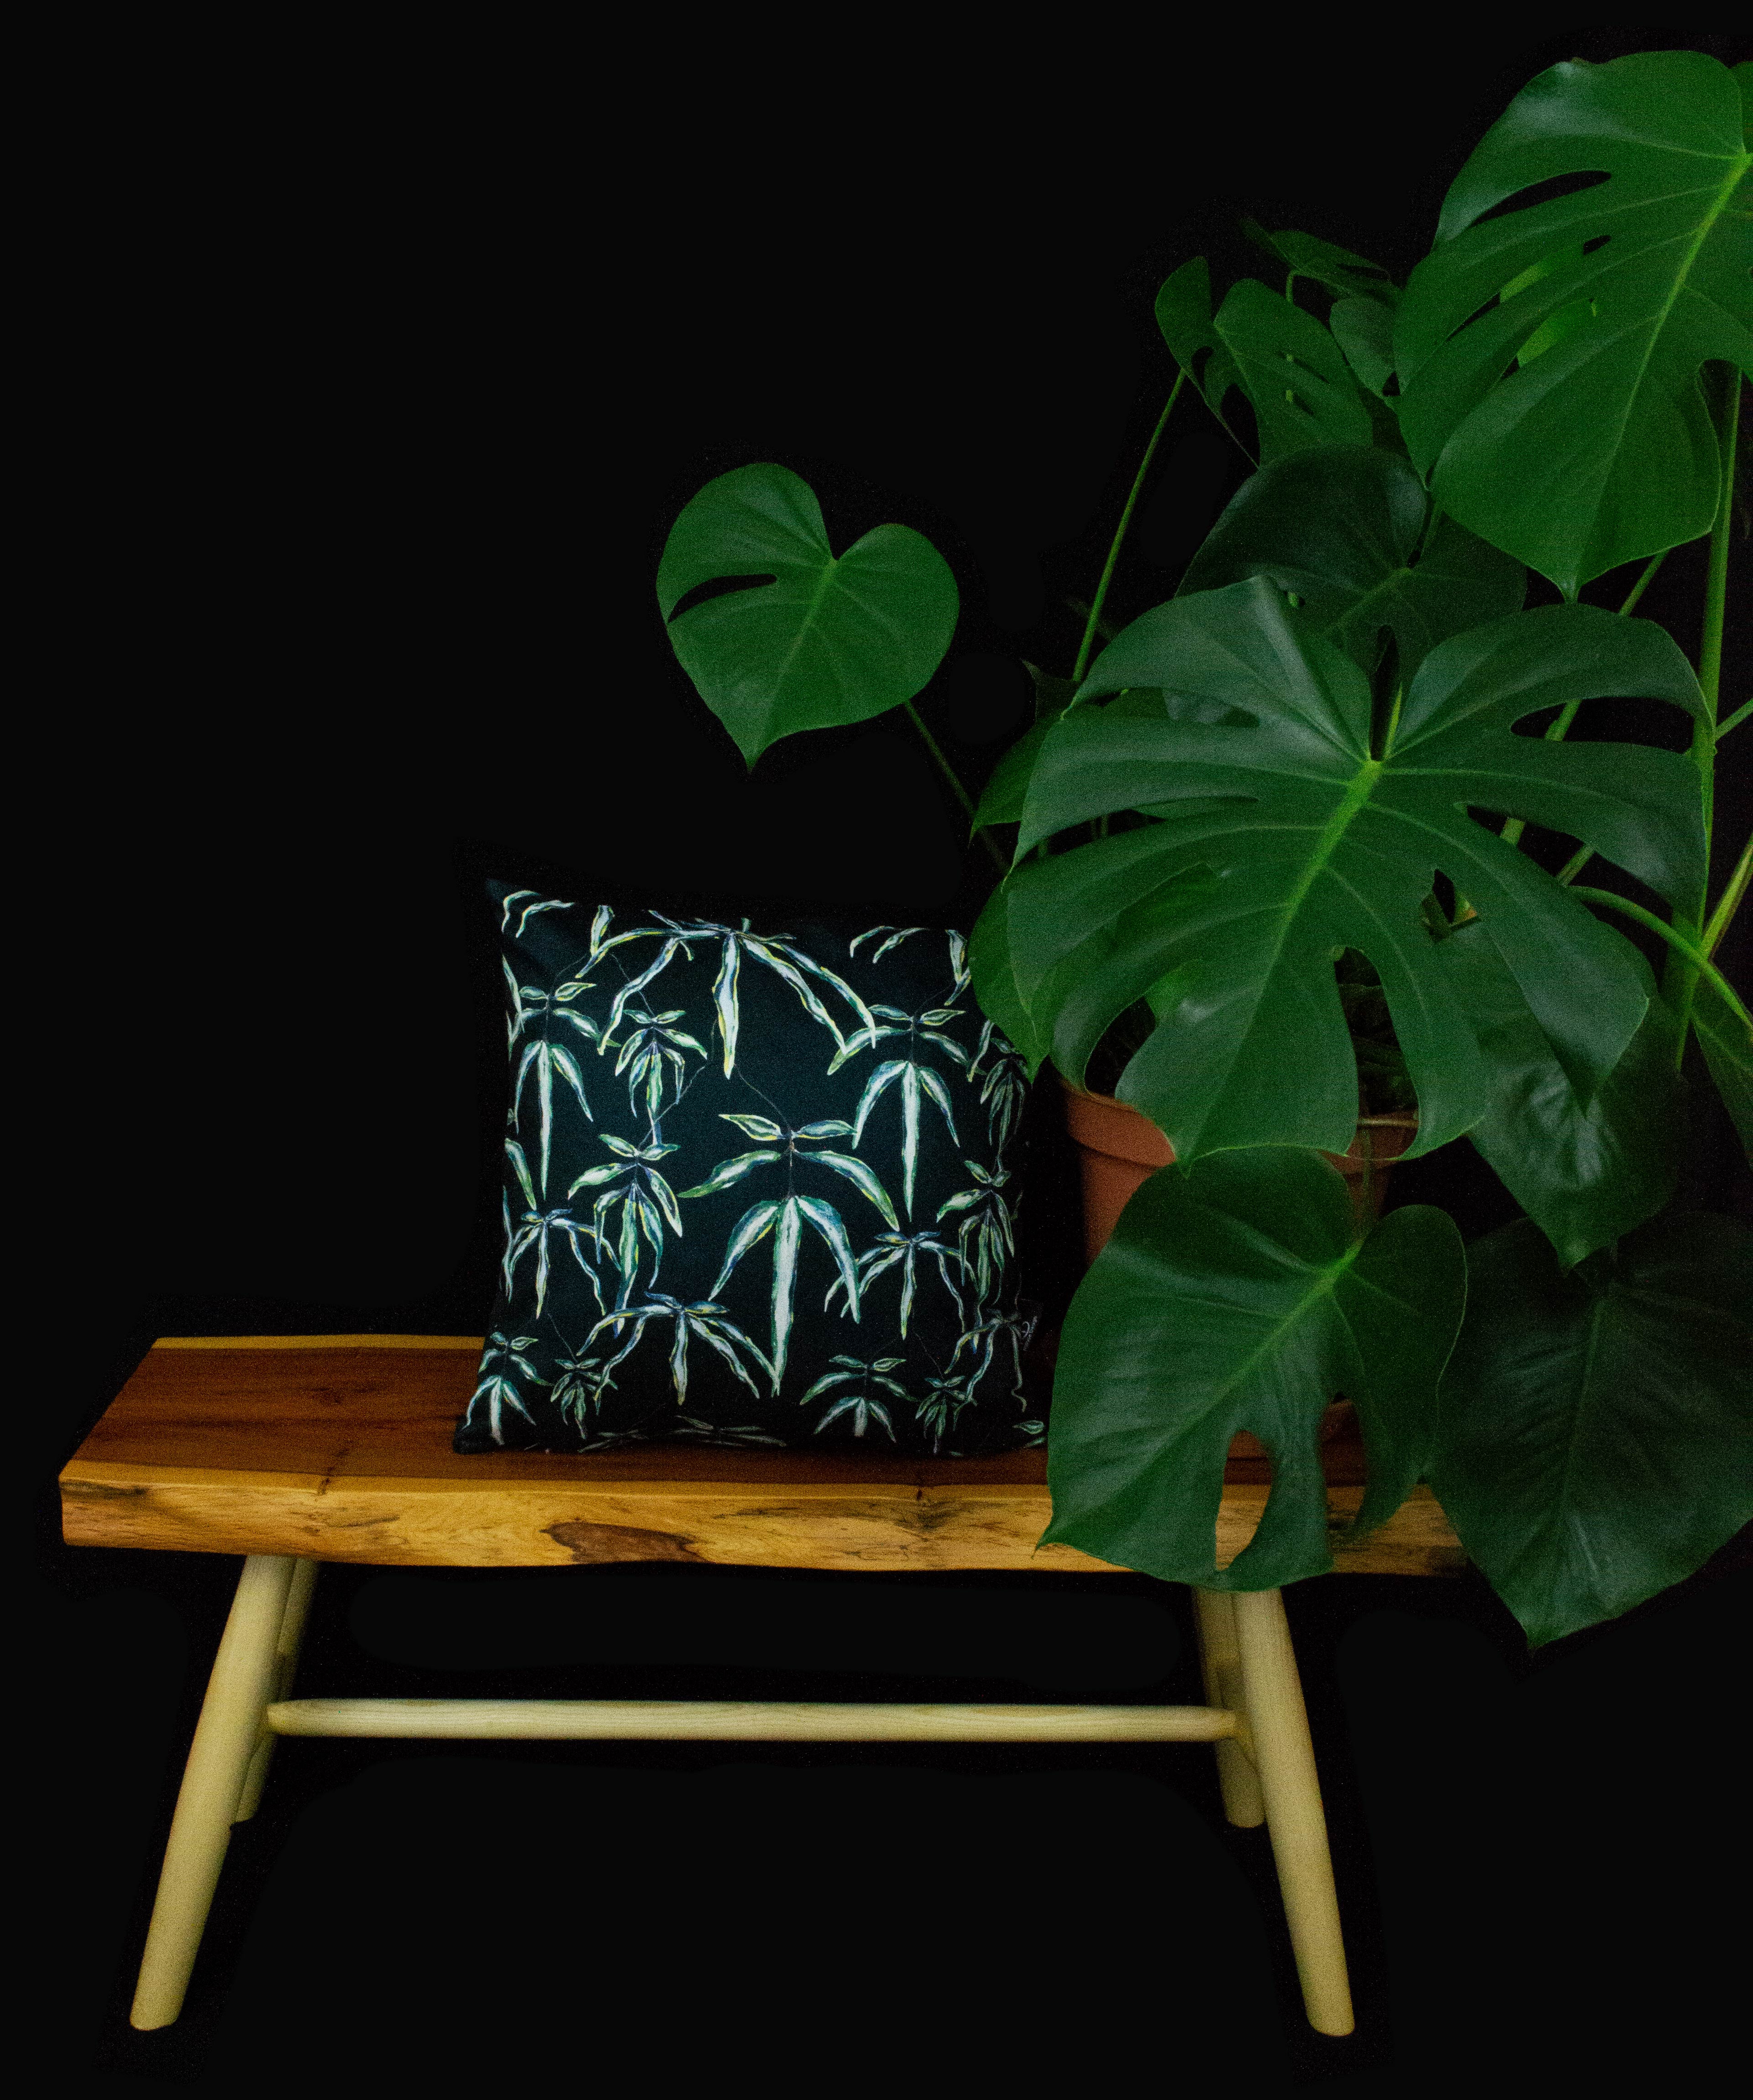 Tactile Connection cushion displayed on wooden table next to cheeseplant and black backdrop